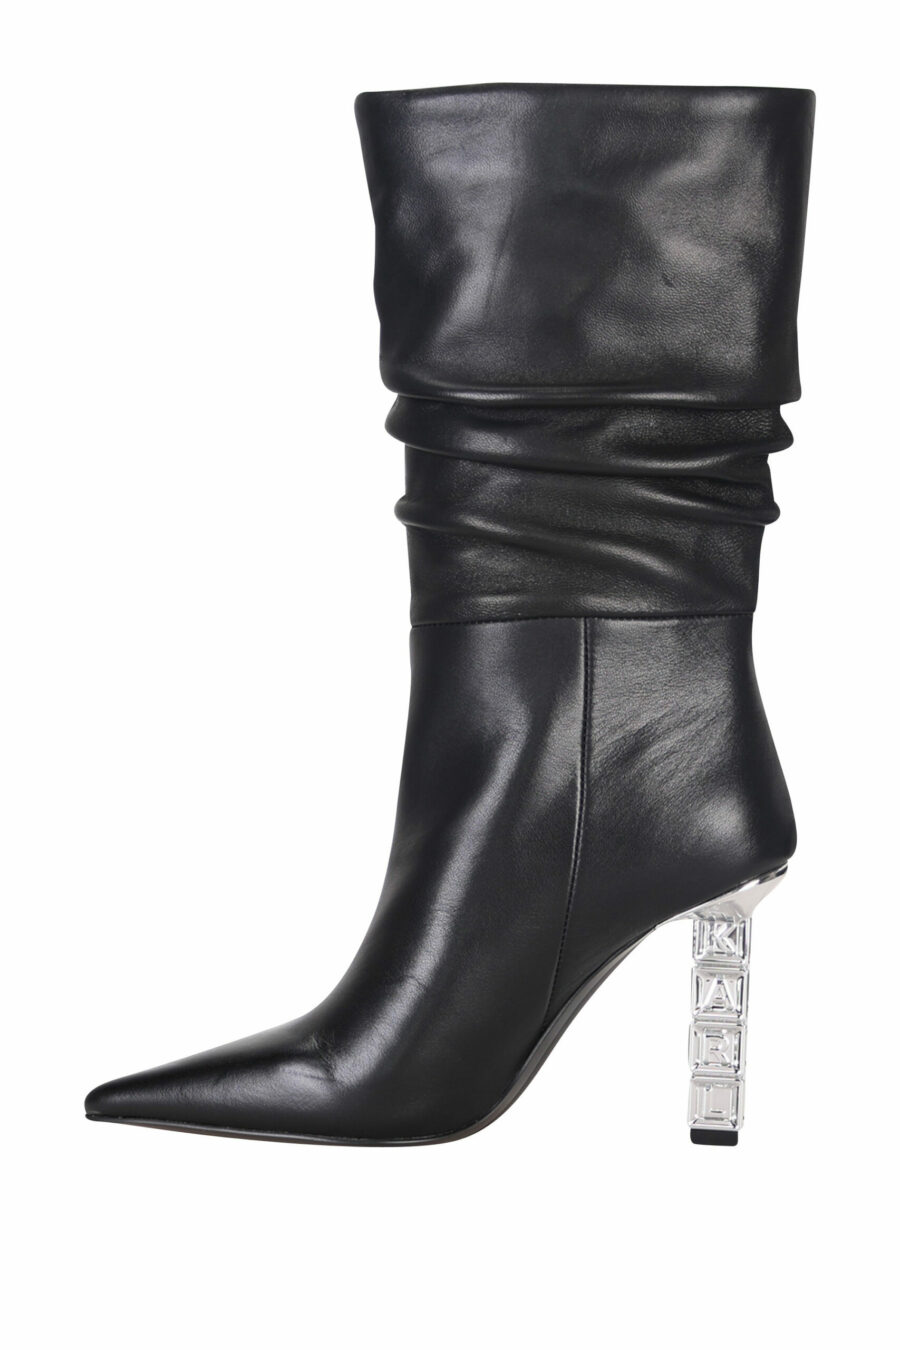 Black mix boots with heel and silver chain - 5059529313073 2 scaled